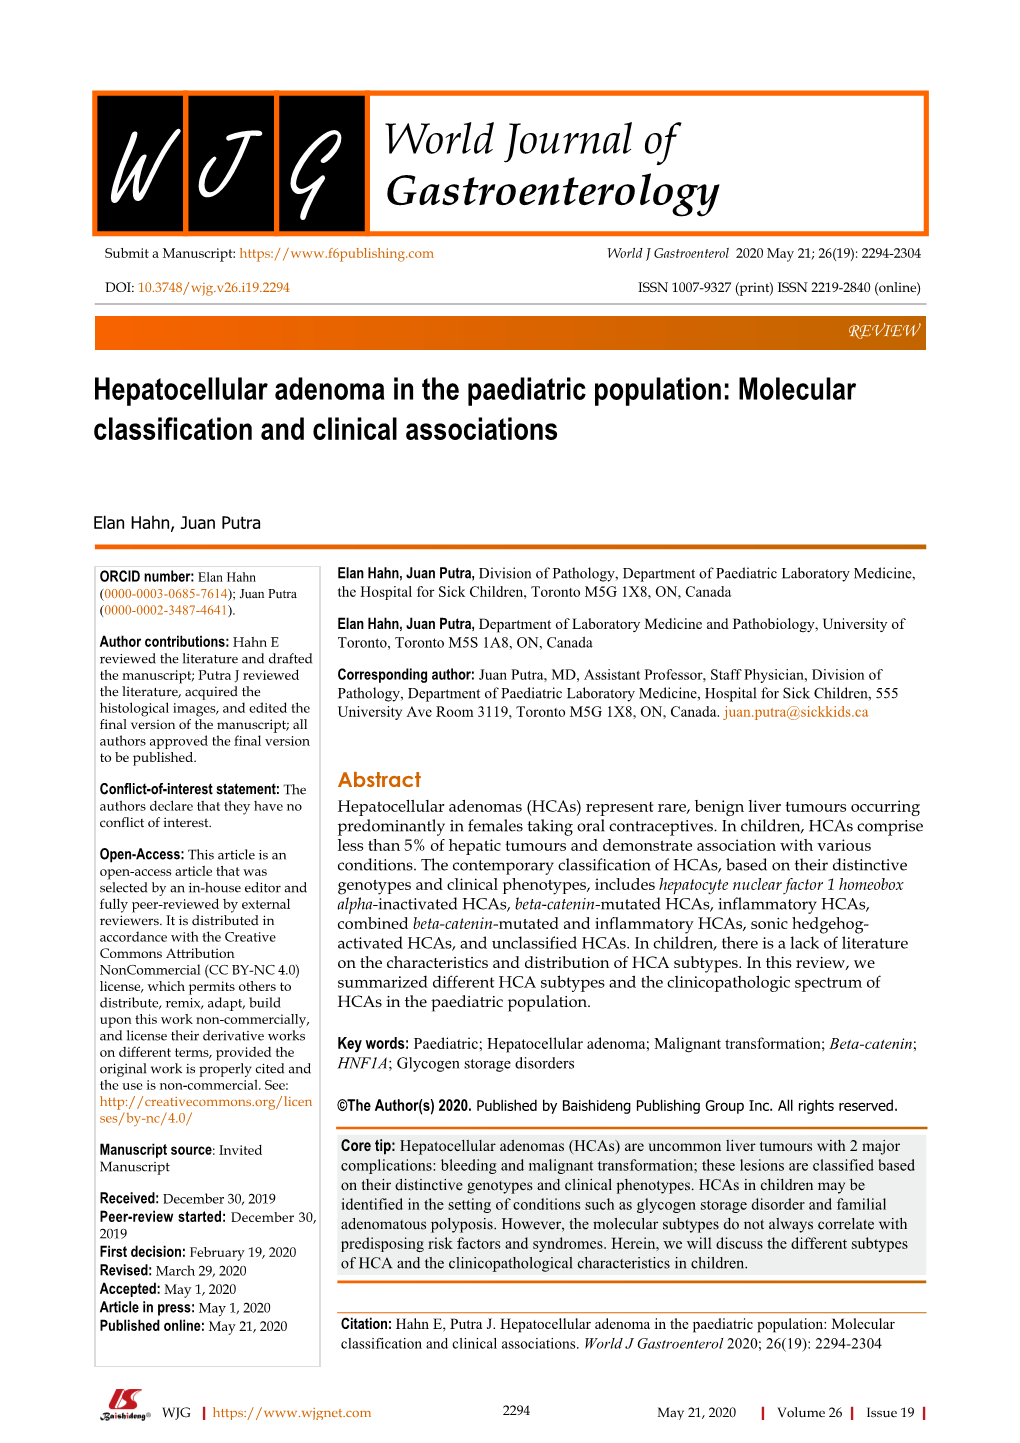 Hepatocellular Adenoma in the Paediatric Population: Molecular Classification and Clinical Associations